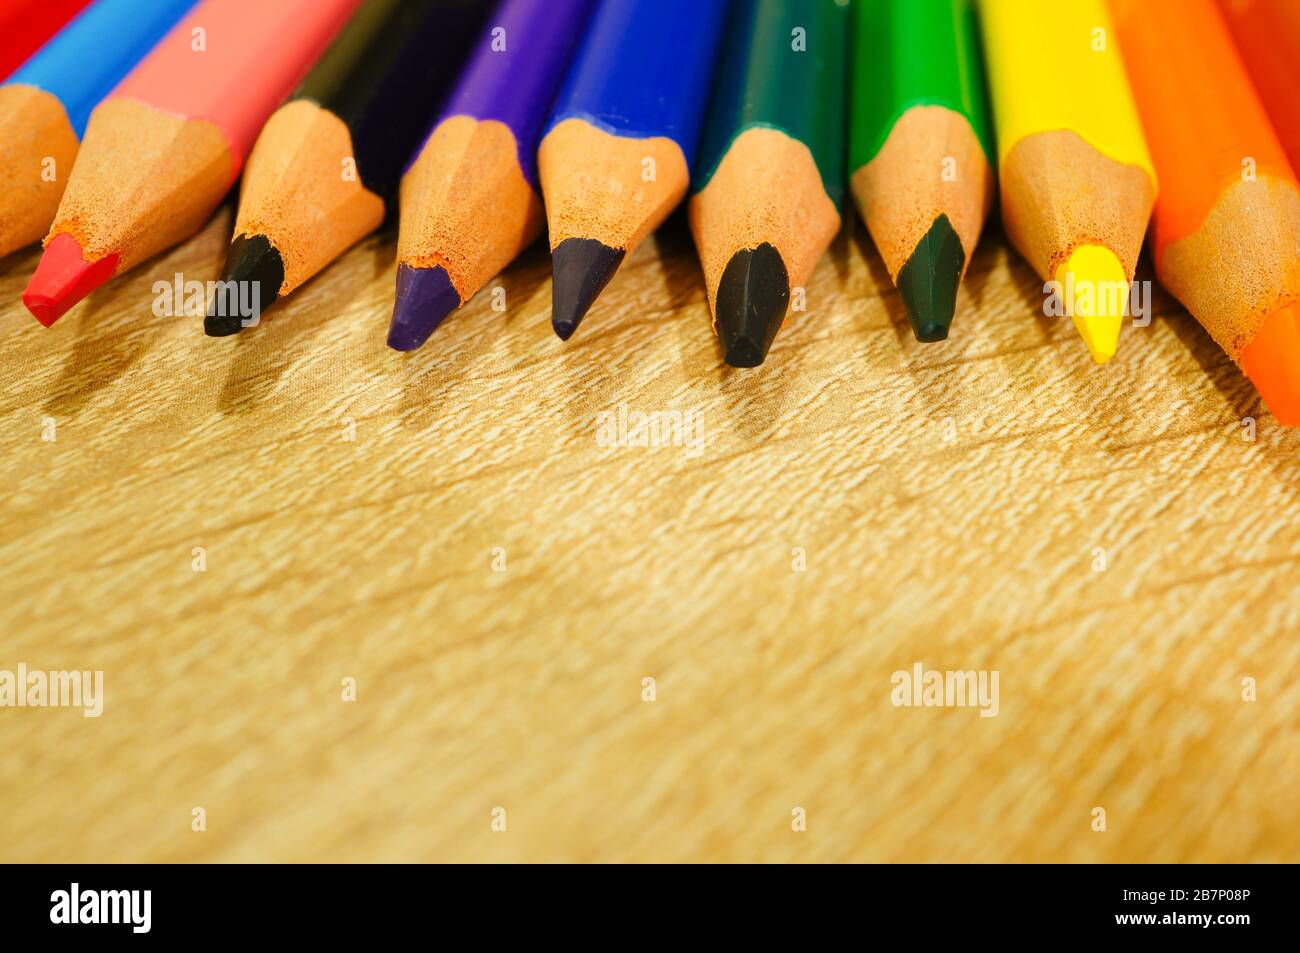 Closeup shot of colored pencils near each other on a wooden surface Stock Photo